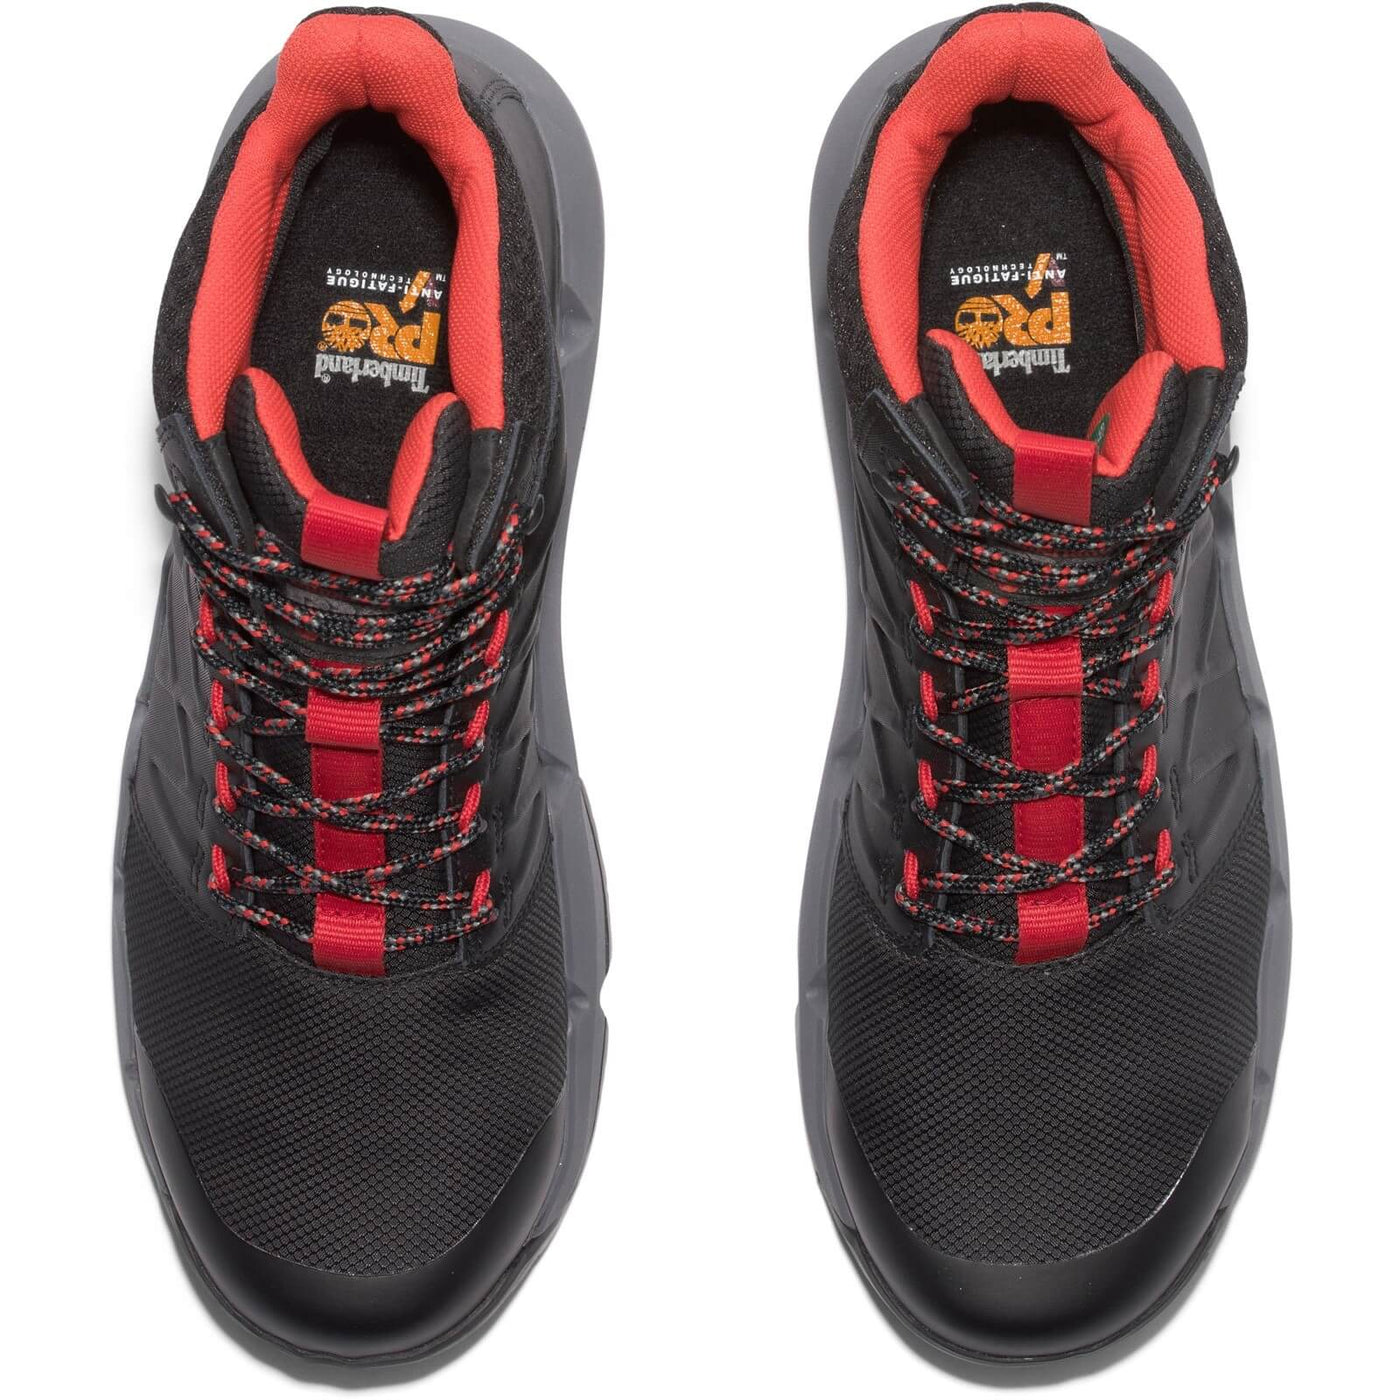 Timberland Pro Morphix 6 Inch Waterproof Composite S7L Hiker Safety Boots Black/Red 5#colour_black-red